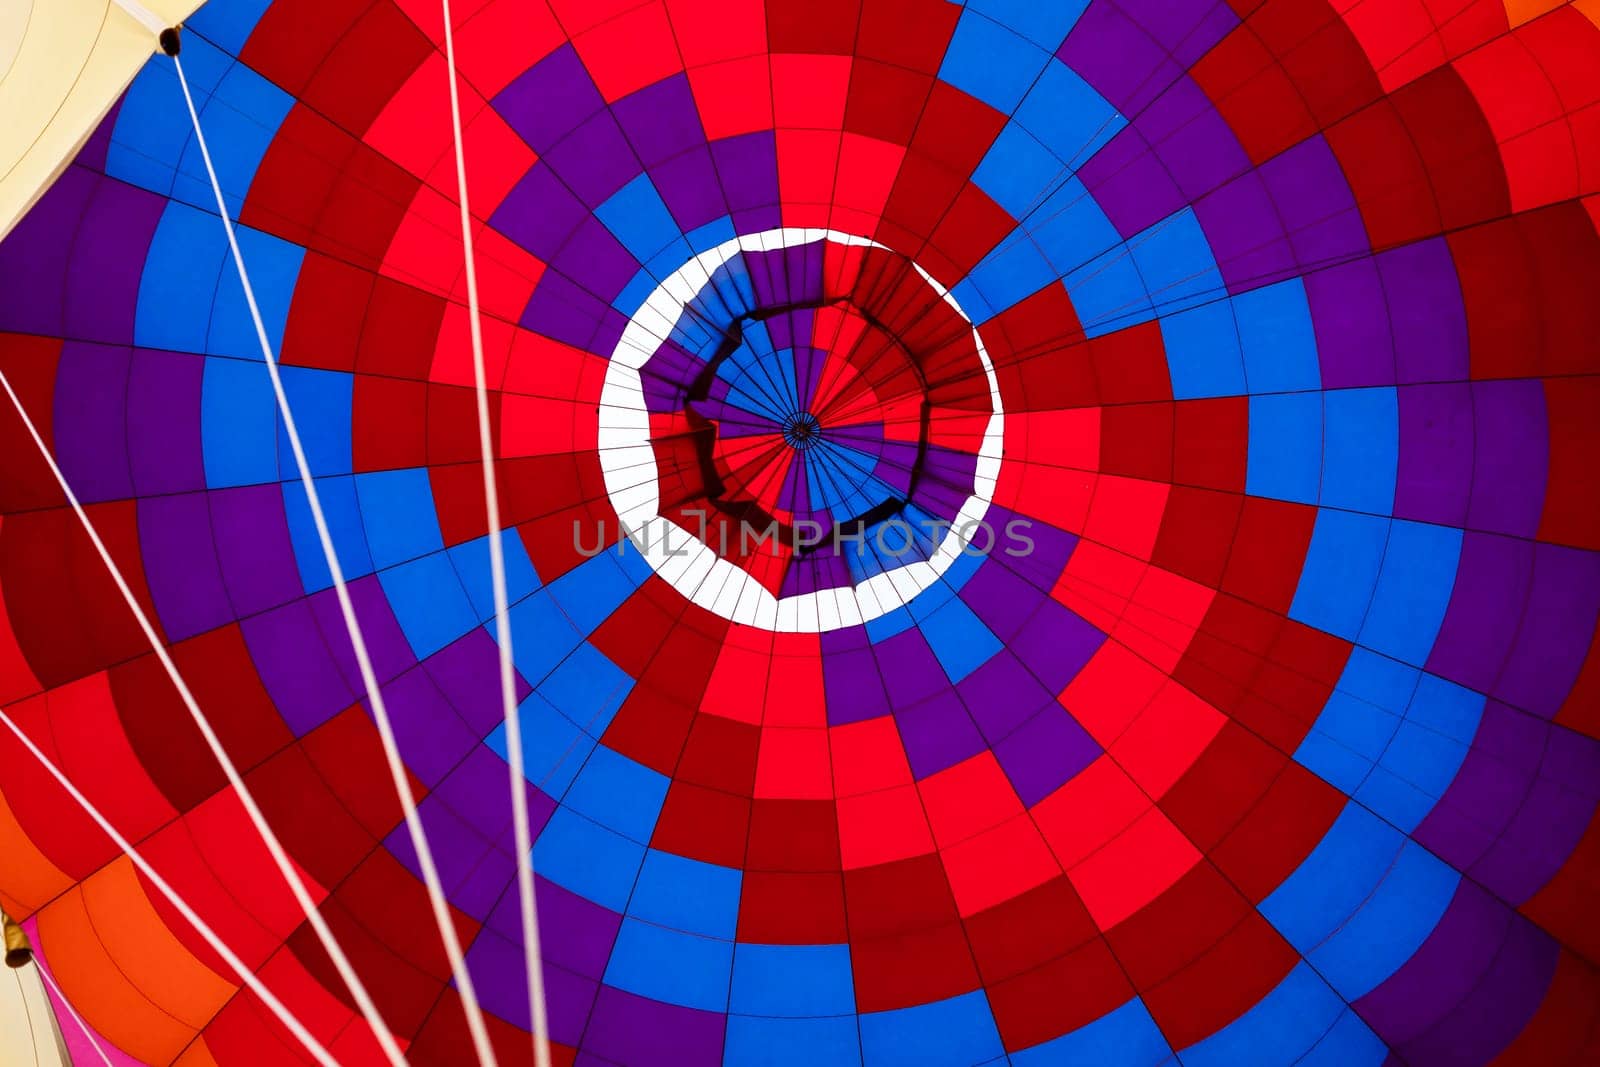 Abstract Background, View Inside Bright Colorful Hot Air Balloon Dome. Multi Colored, Horizontal Plane. Hot Air Expedition, Ride. Joyful, Spectacular Entertainment. High quality photo